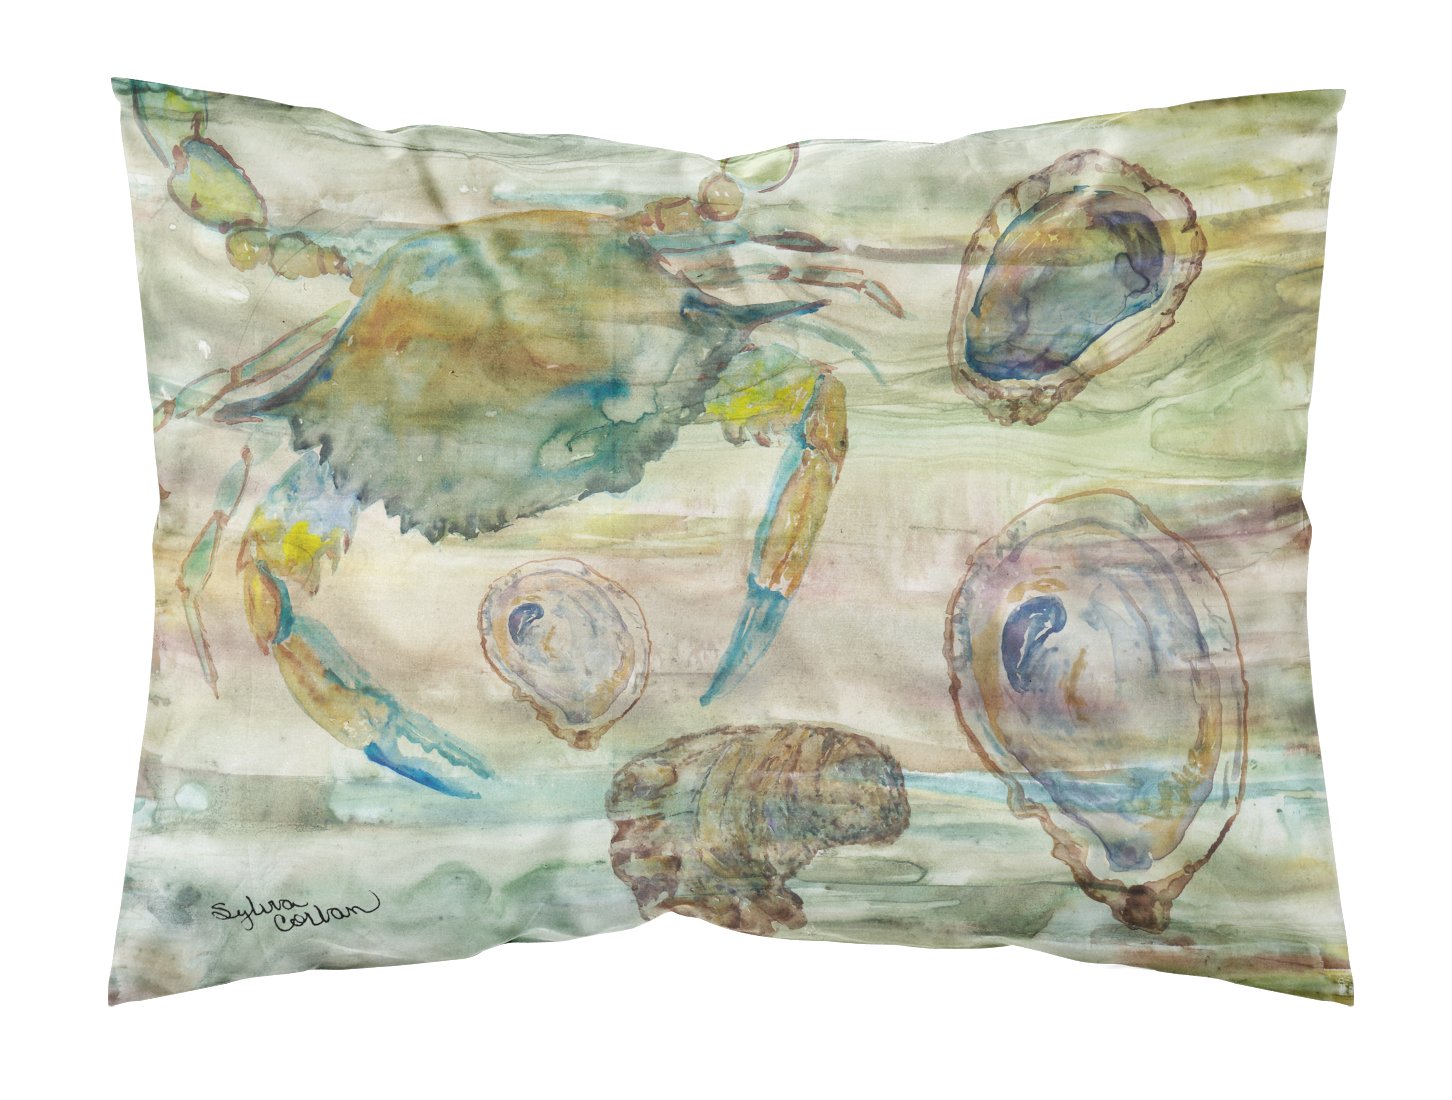 Crab, Shrimp and Oyster Sunset Fabric Standard Pillowcase SC2017PILLOWCASE by Caroline's Treasures